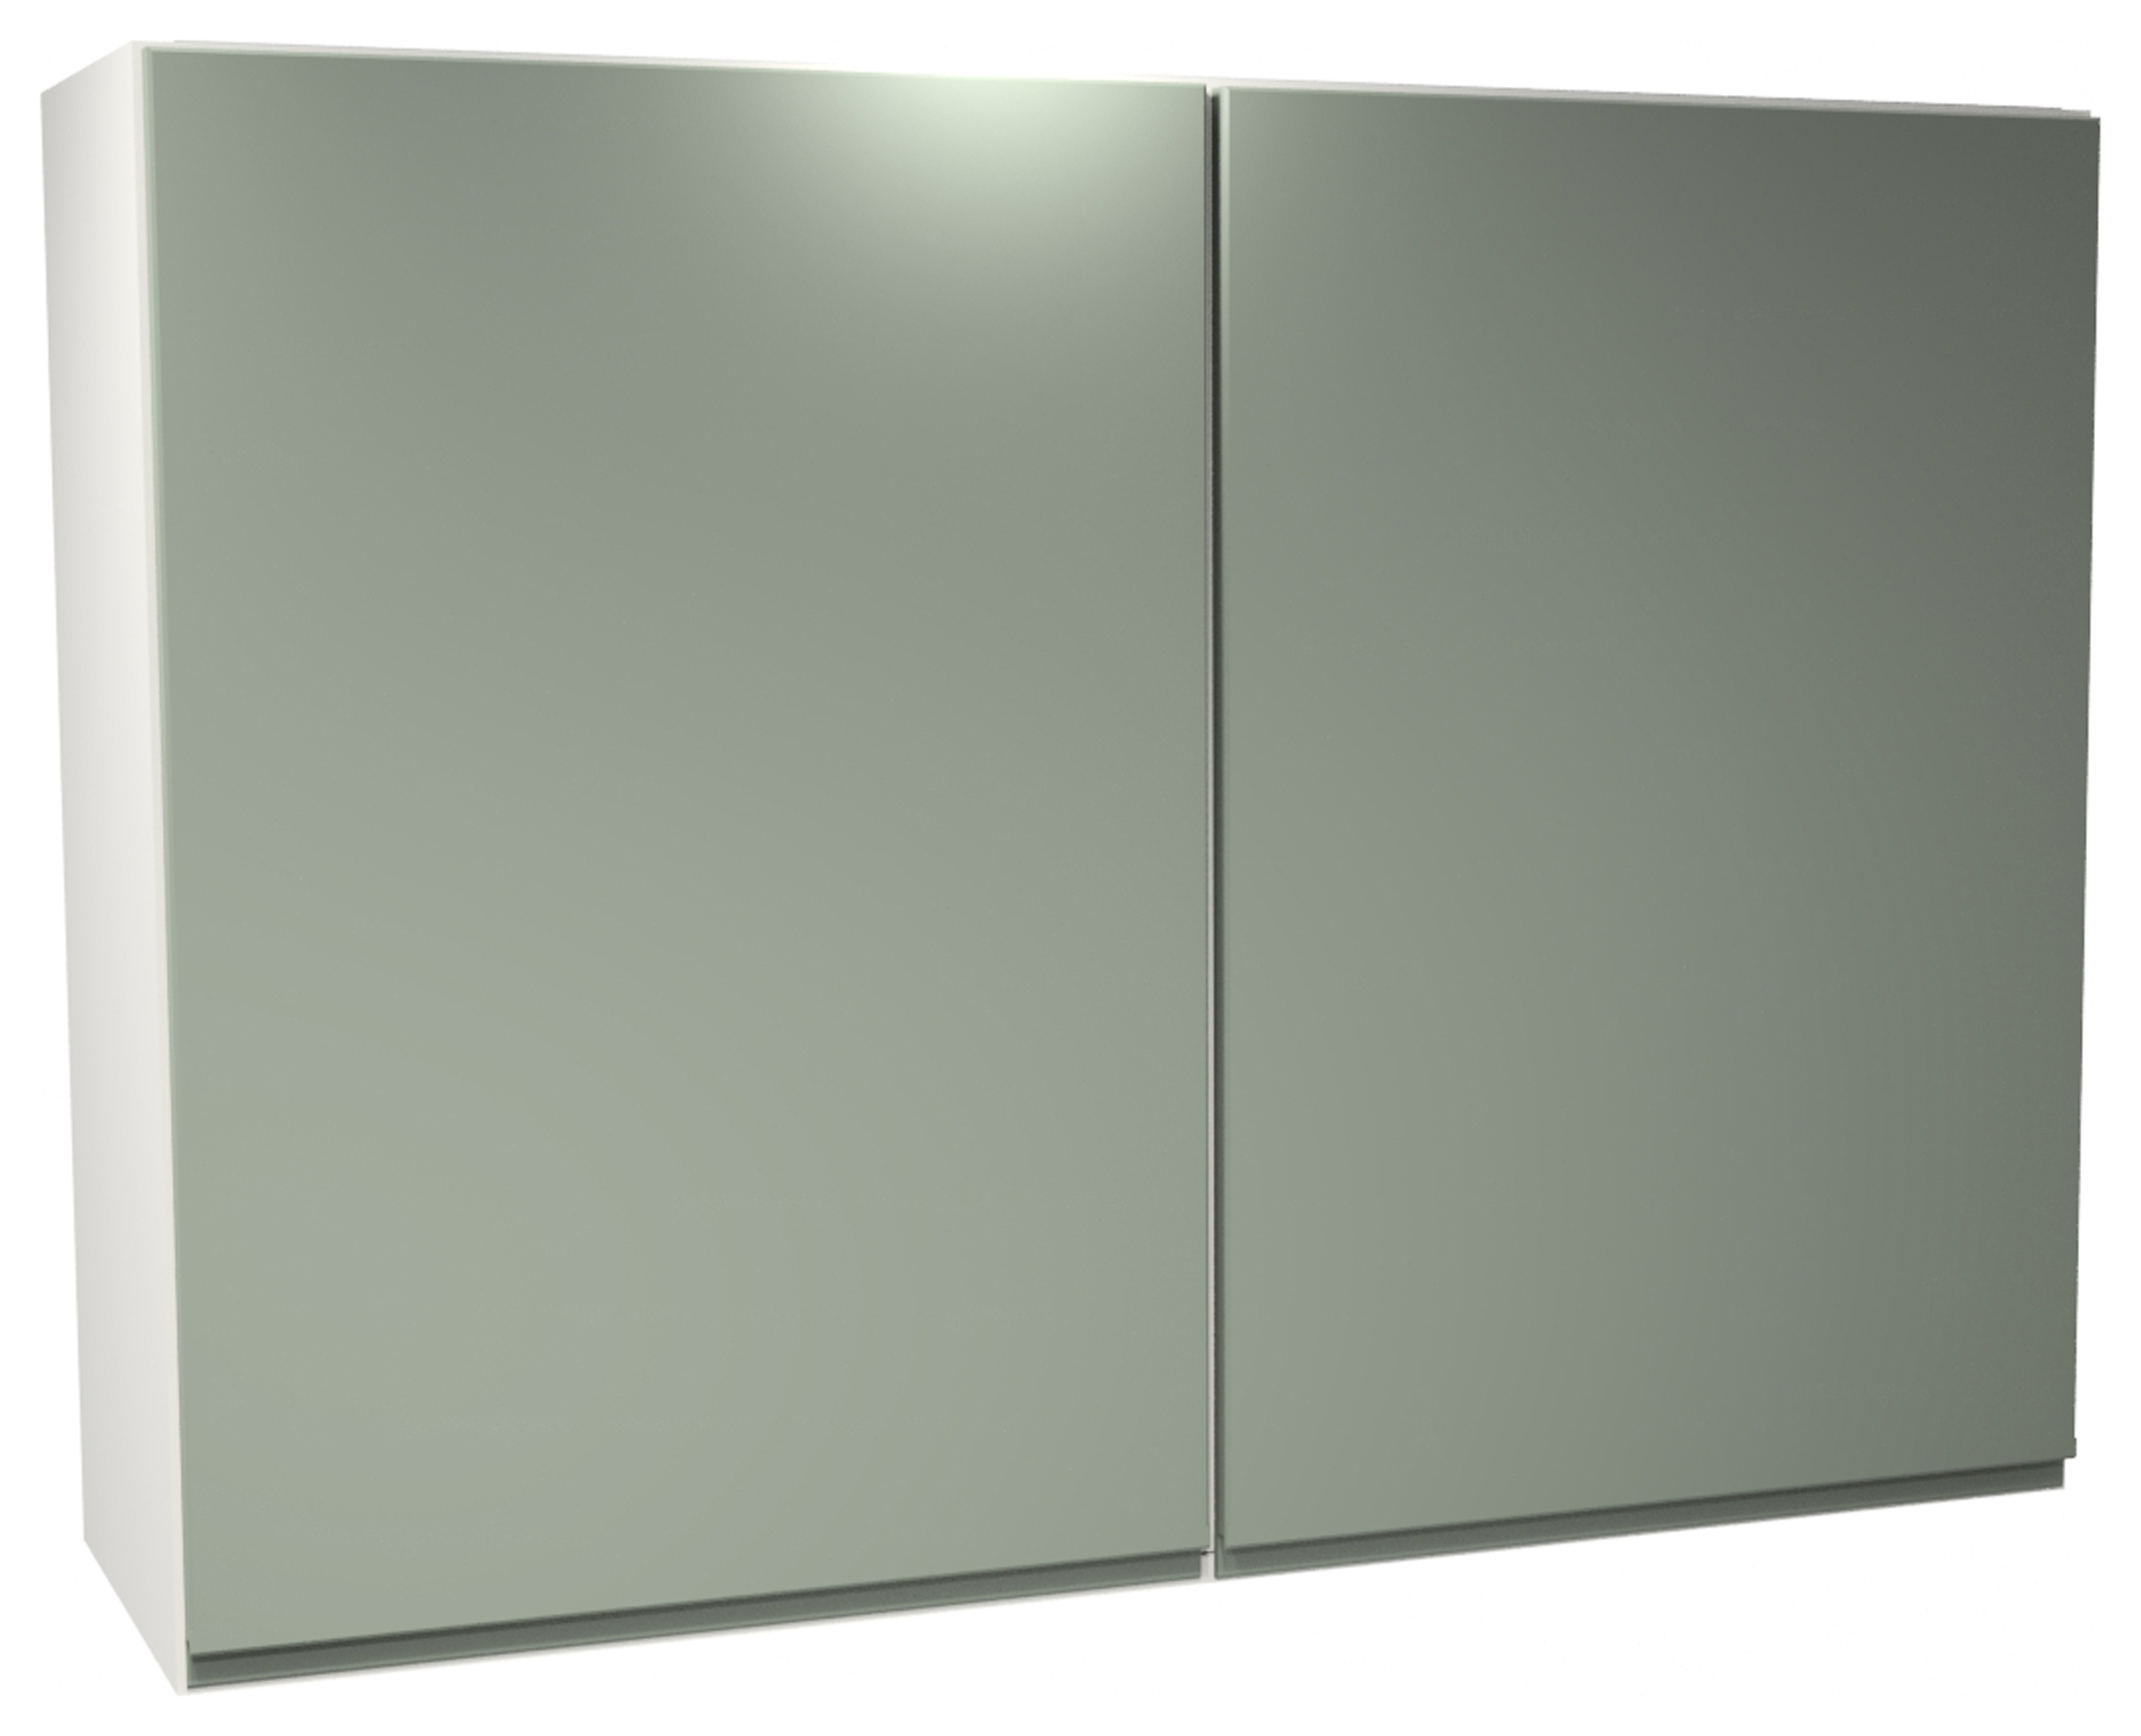 Image of Wickes Madison Reed Green Wall Unit - 1000mm